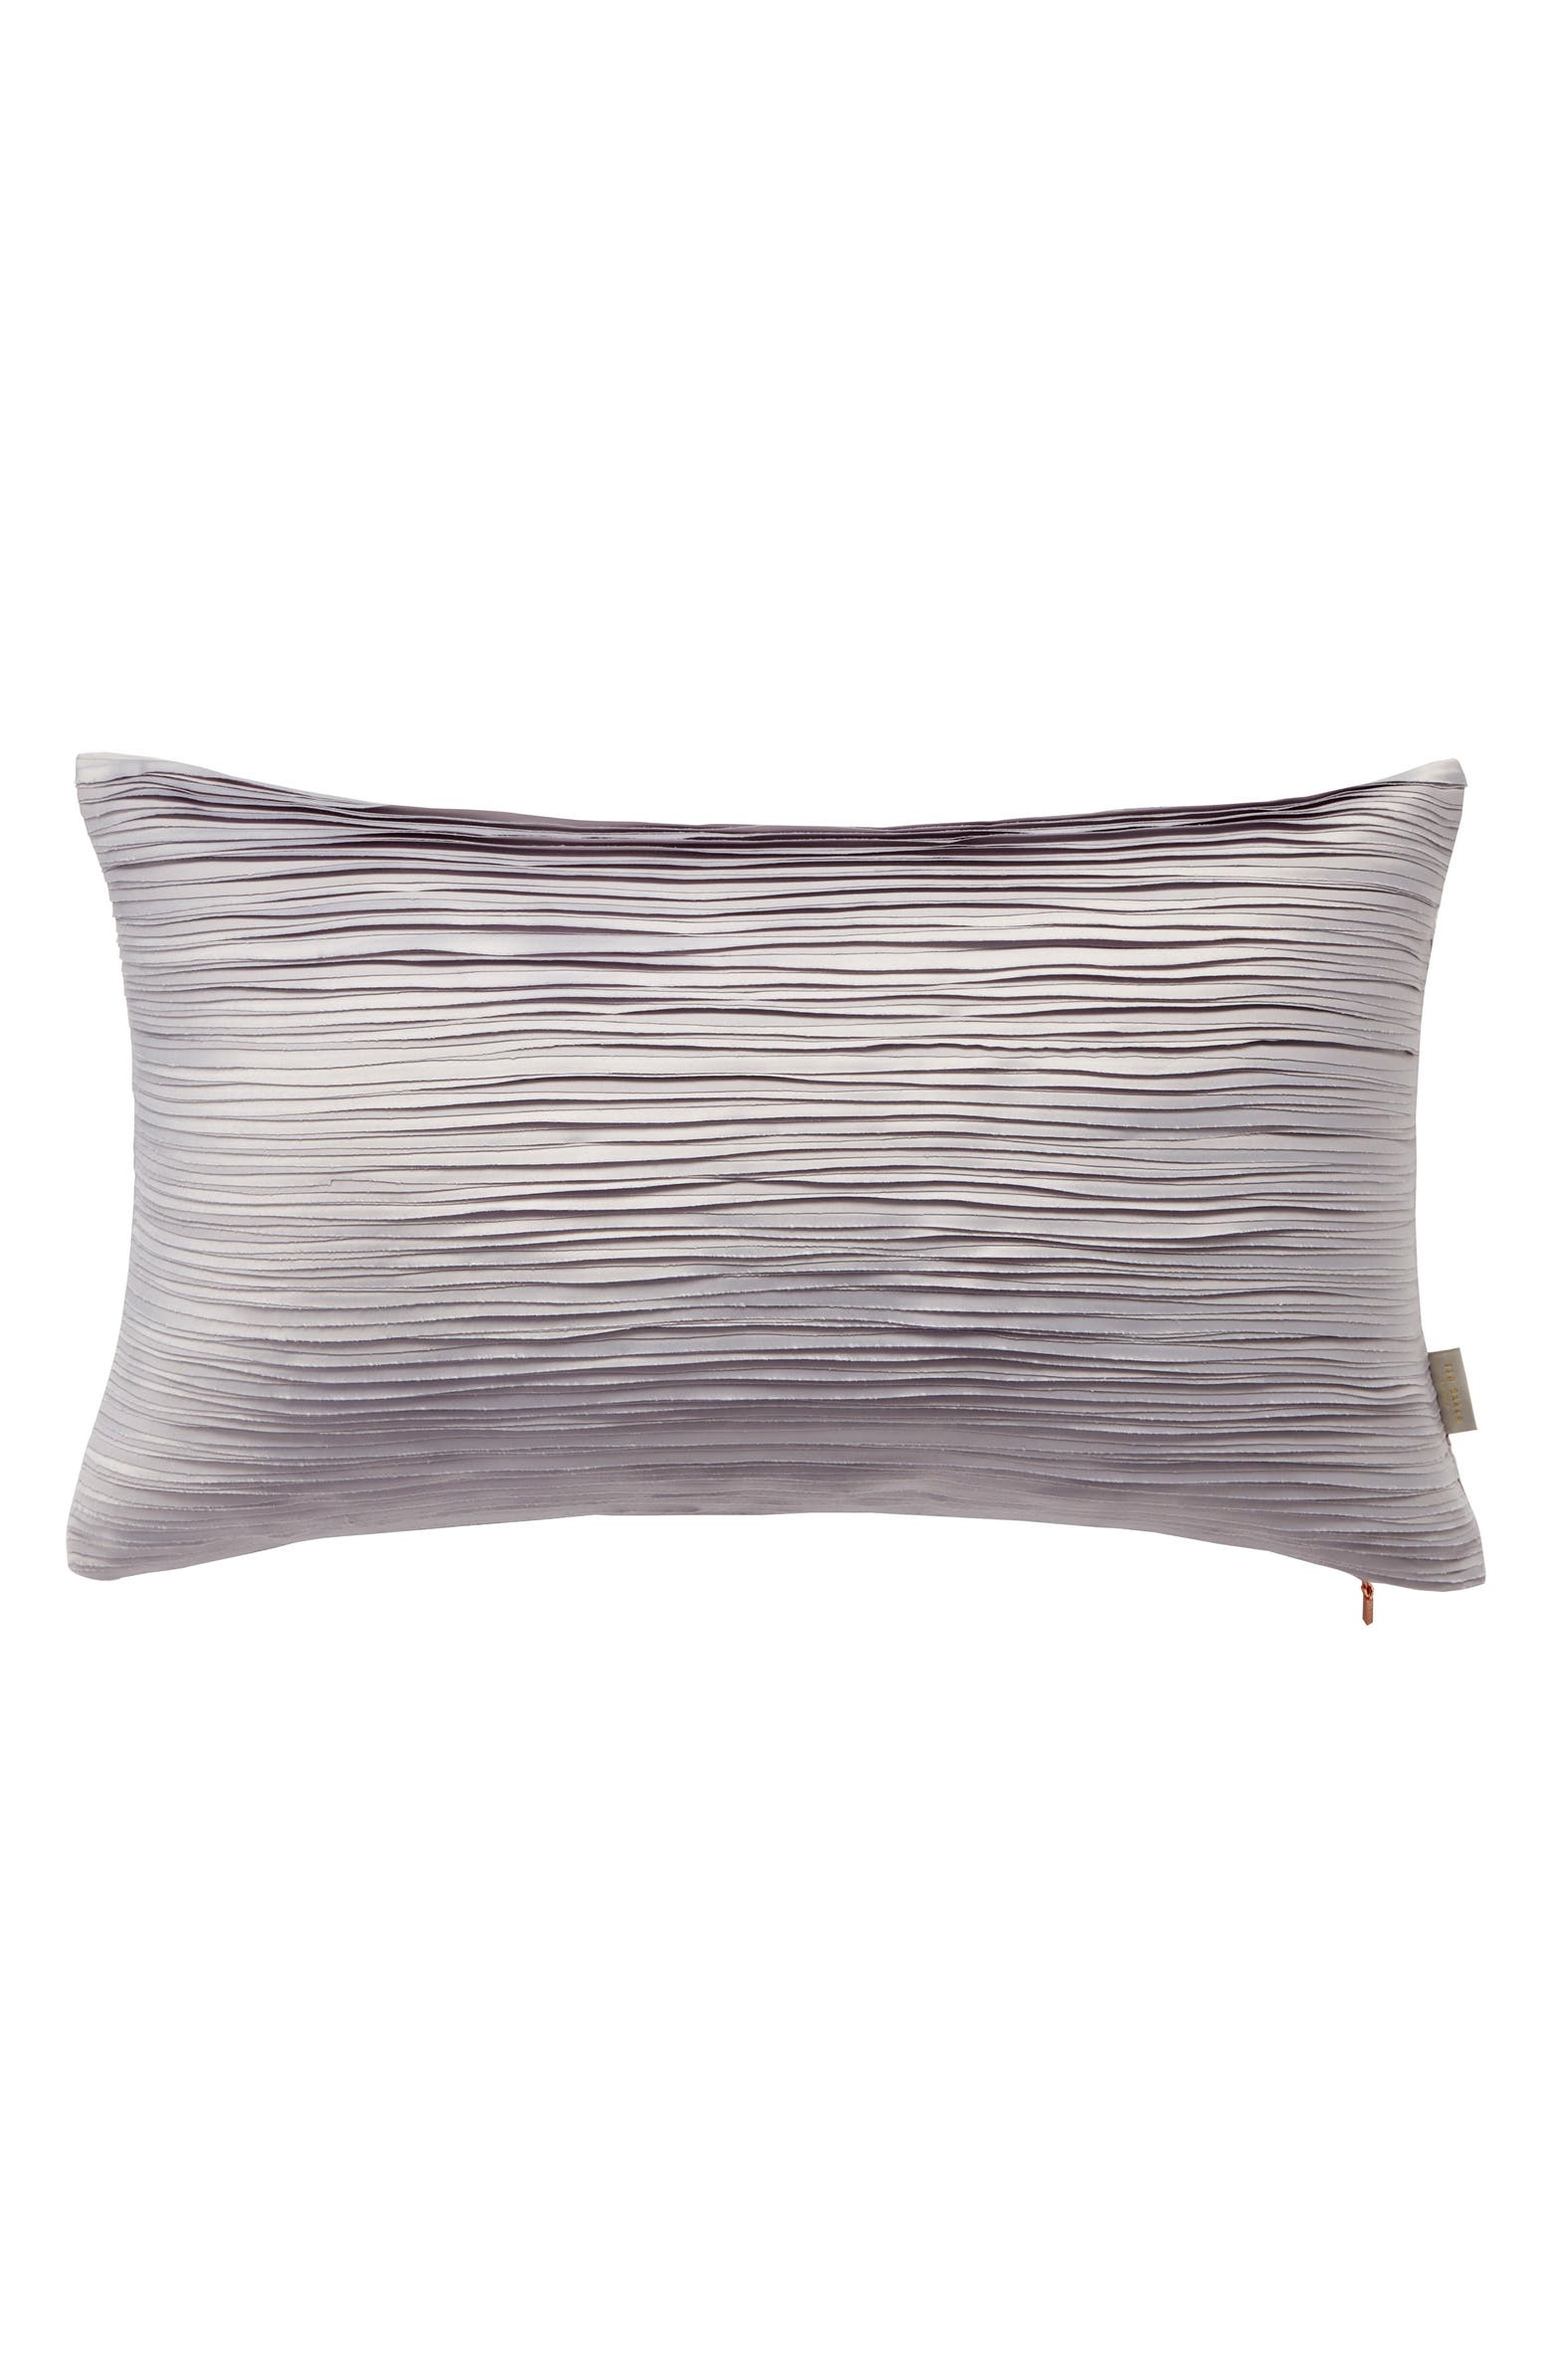 Ted Baker London Ruched Accent Pillow | Nordstrom